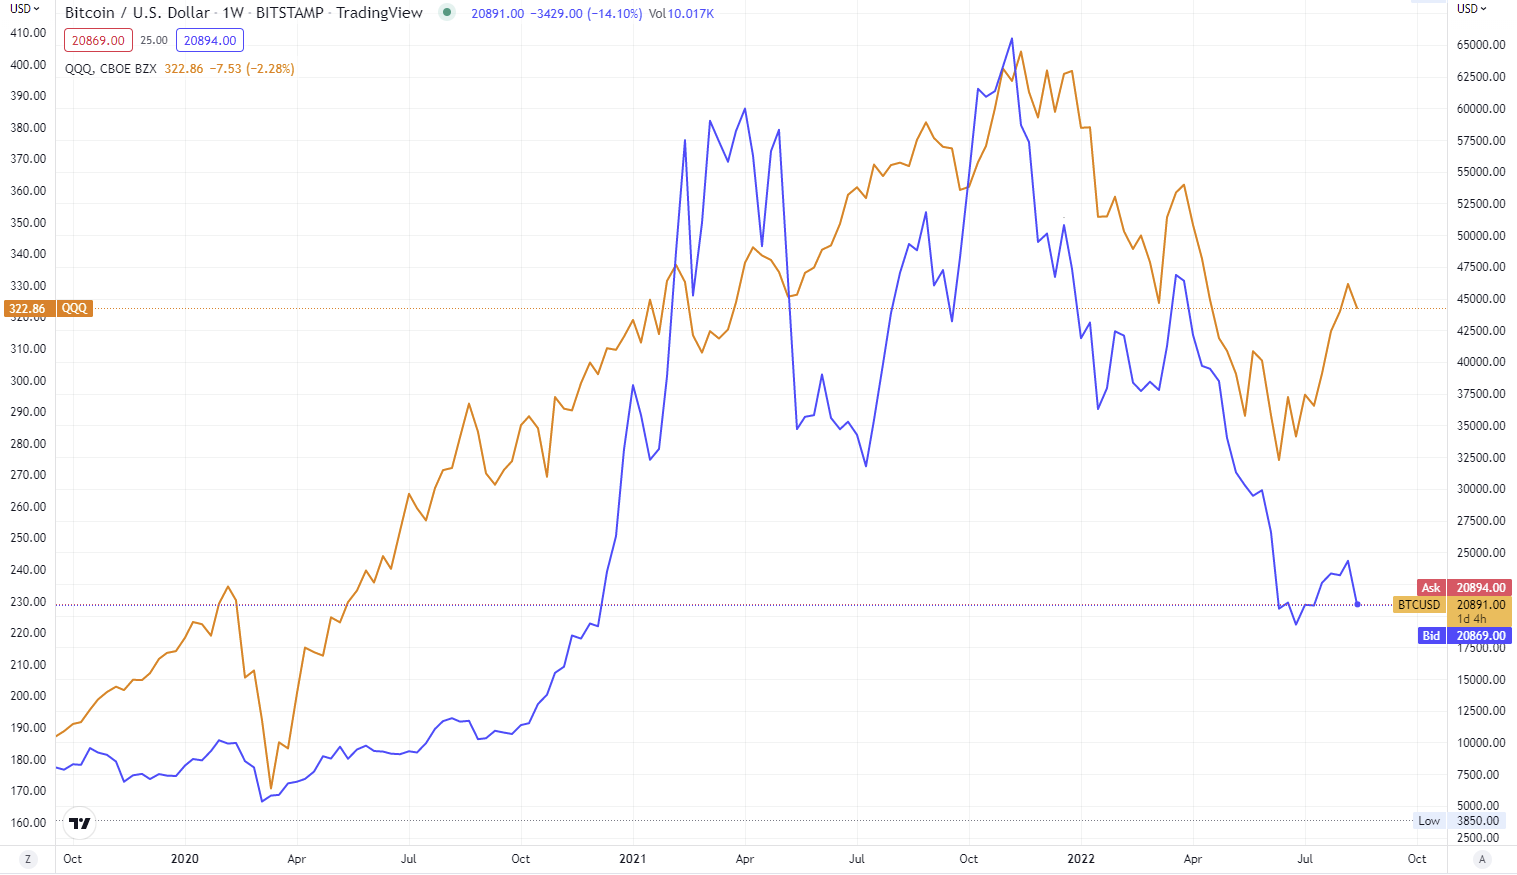 A look at Bitcoin price moves vs QQQ. Looks pretty correlated to